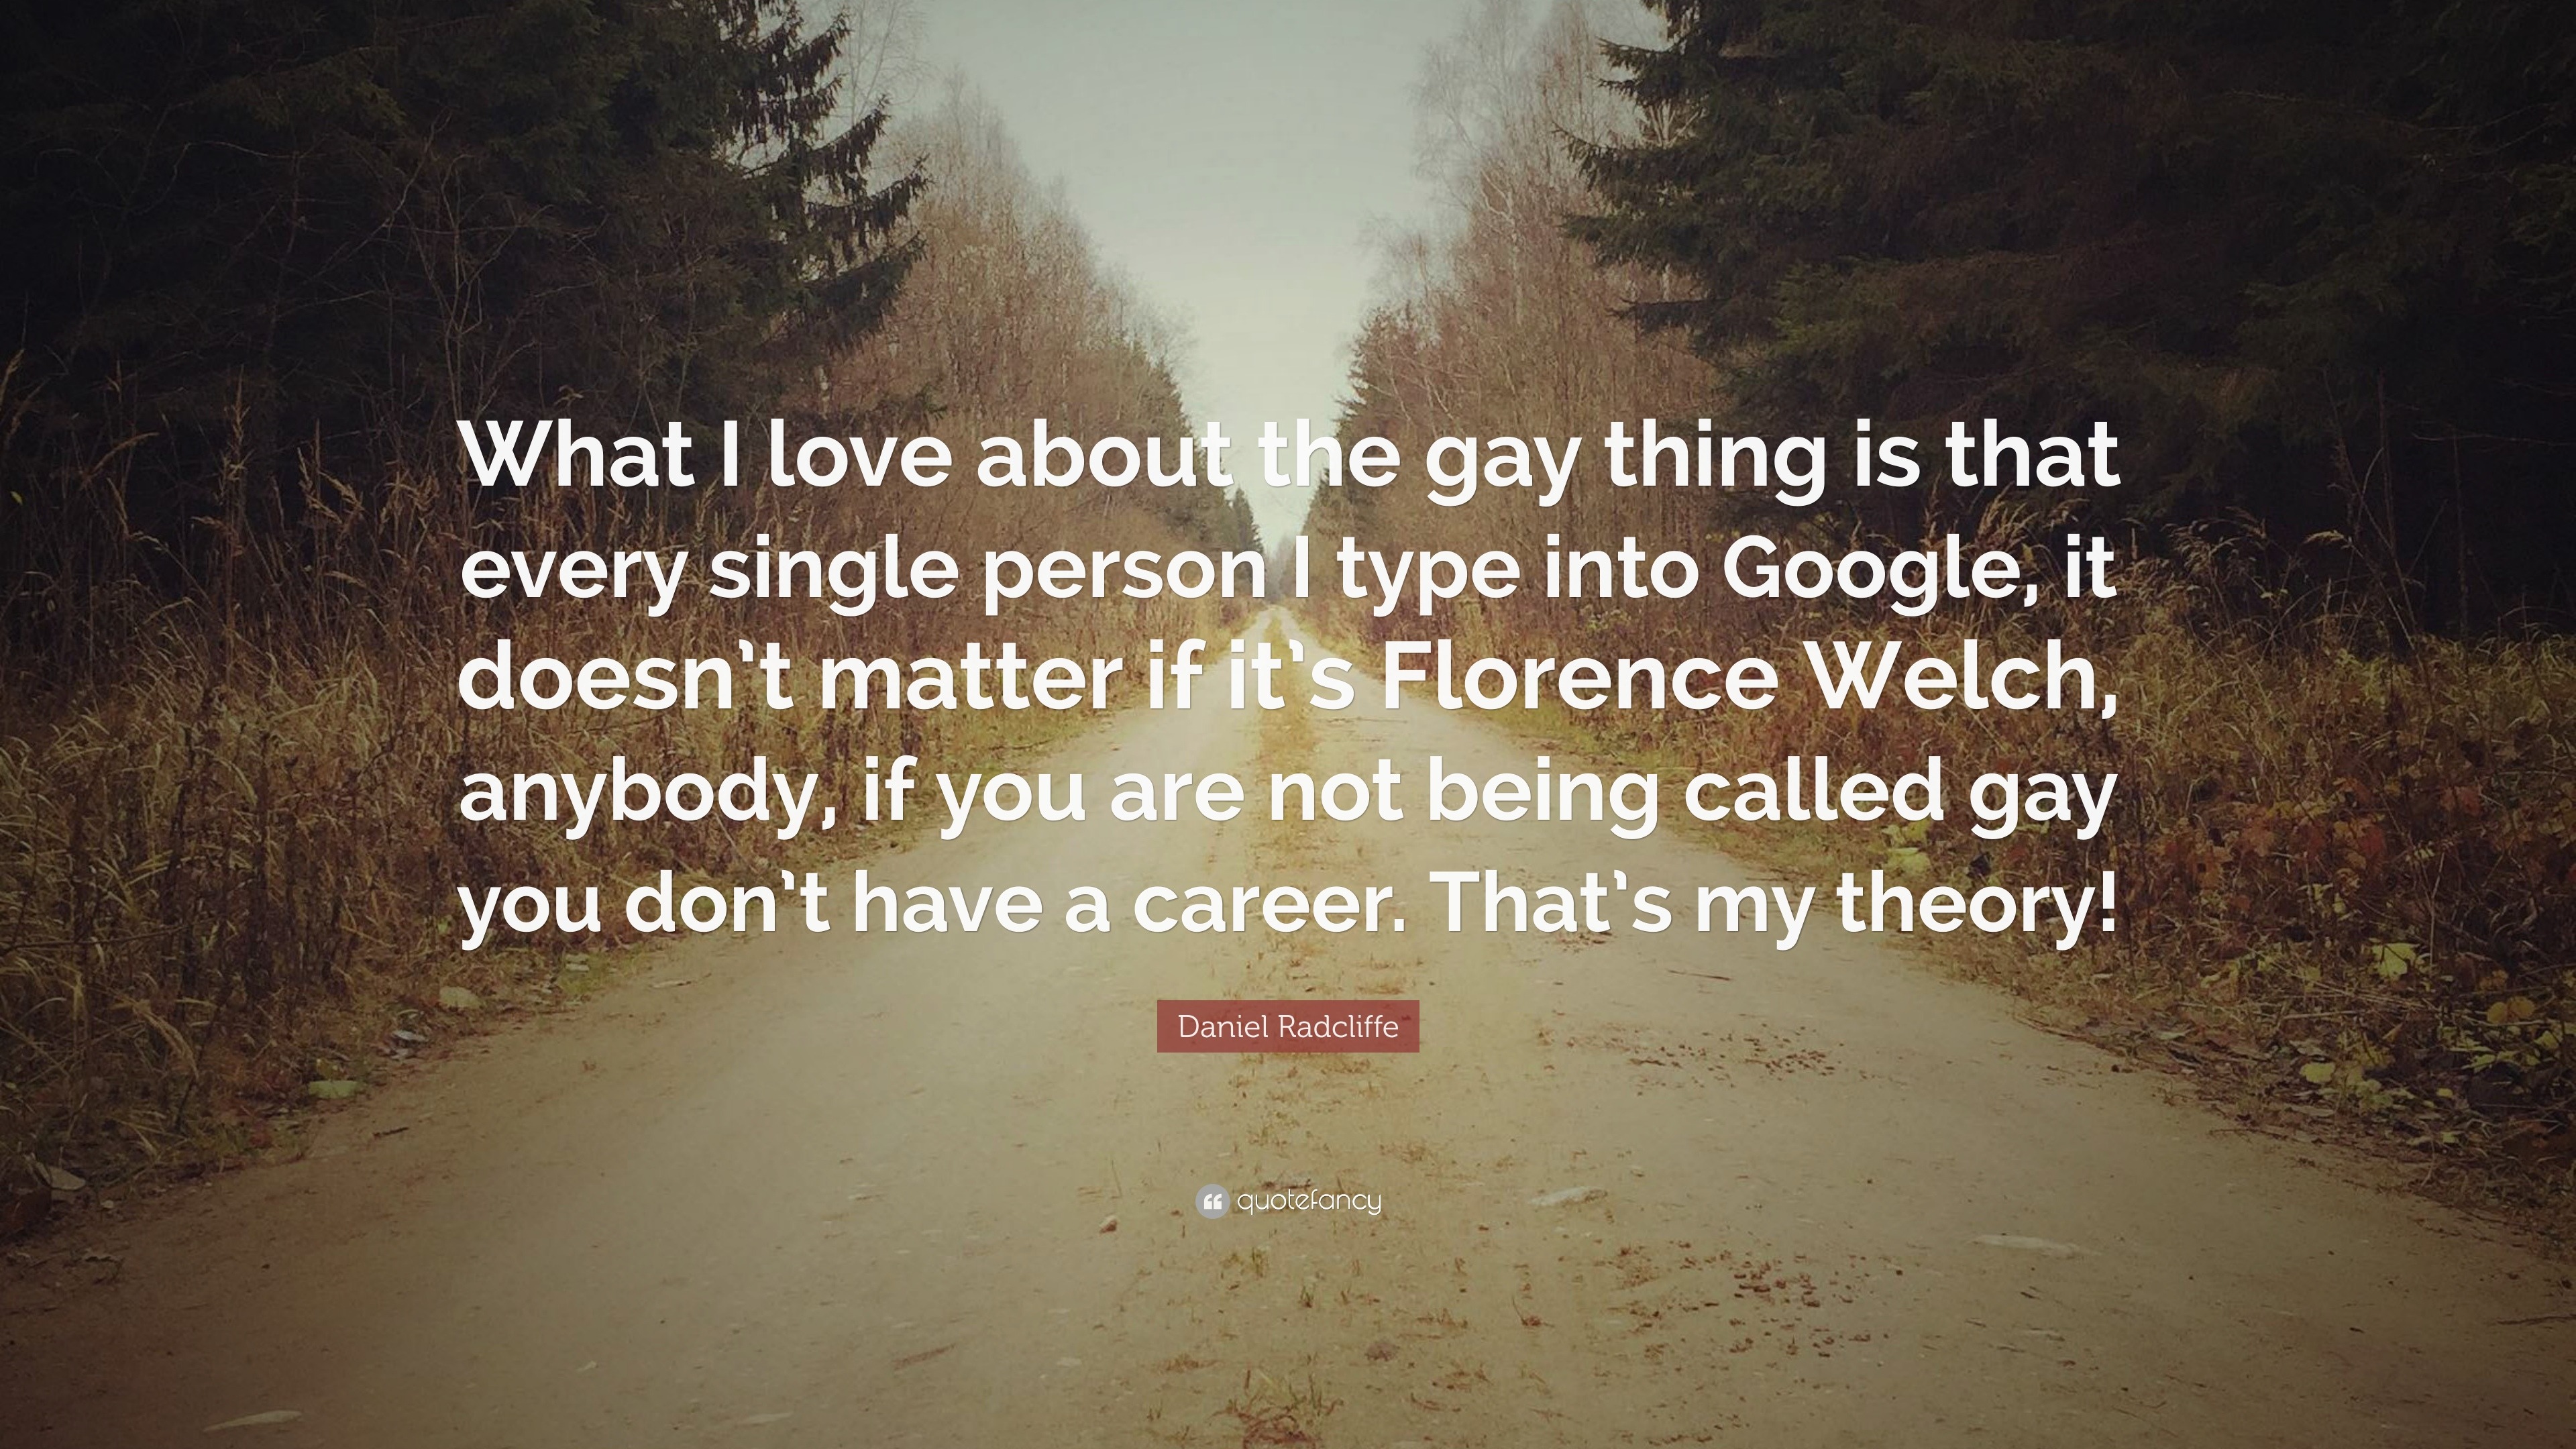 Quotes About Careers “What I love about the thing is that every single